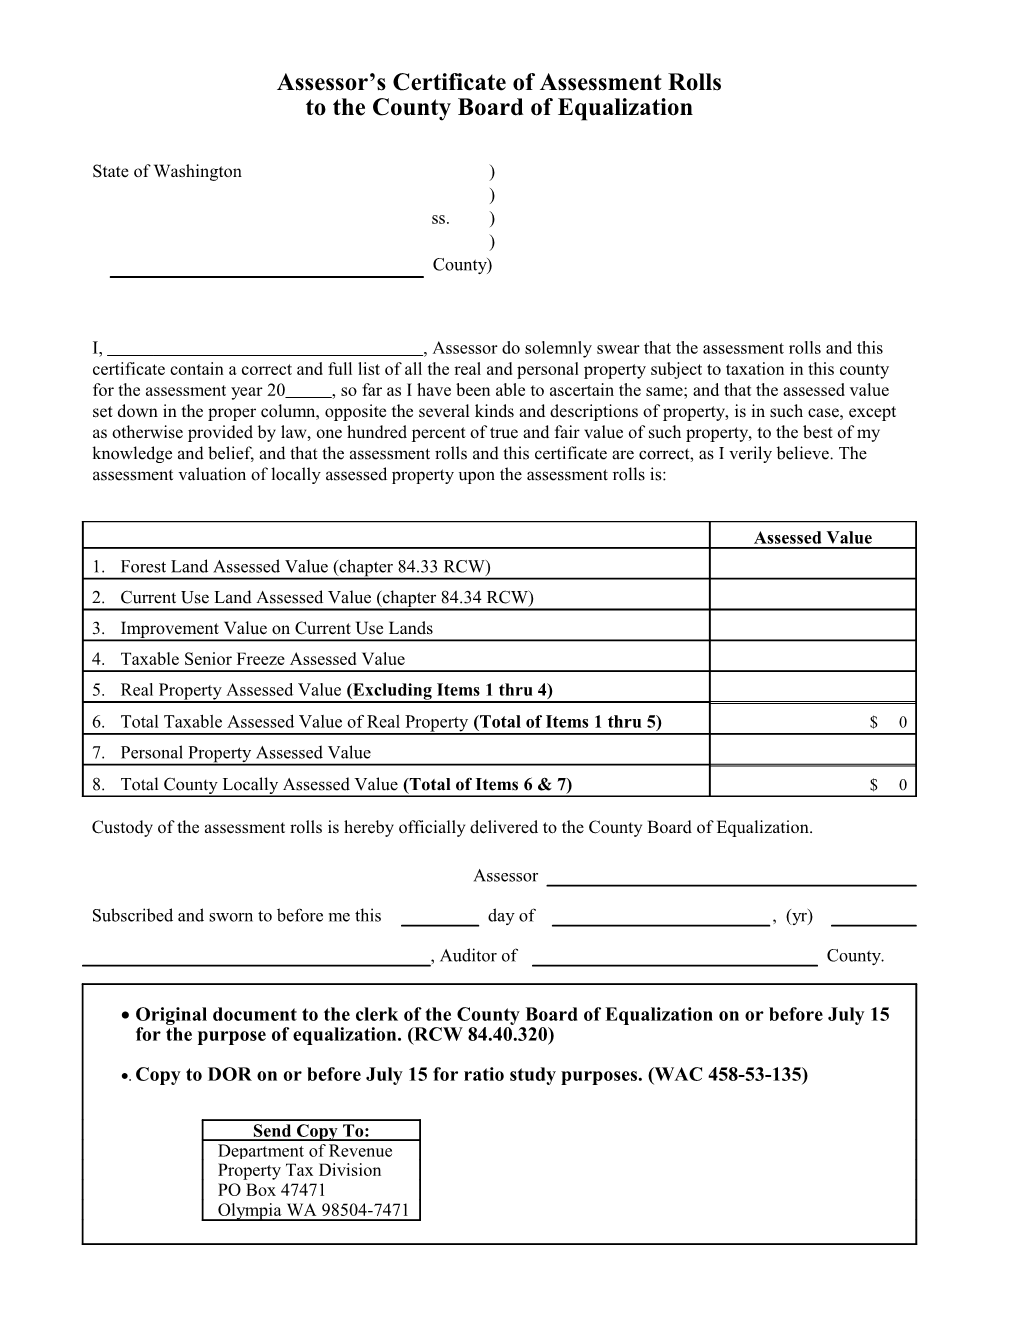 Assessor's Certificate of Assessment Rolls to the County Board of Equalization REV 64 0051E